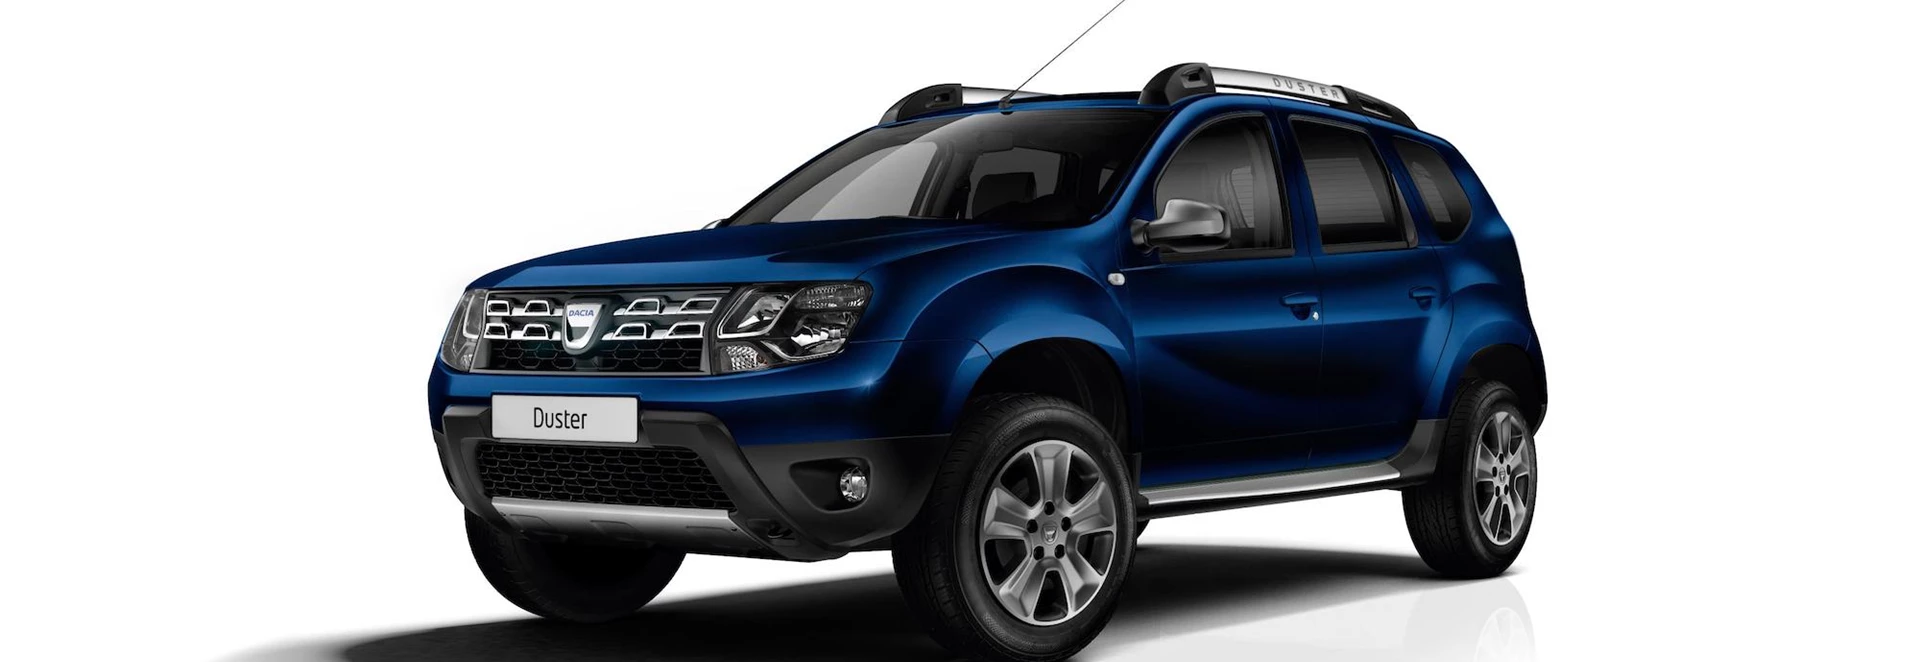 Two new trim levels introduced for the 2018 Dacia Duster